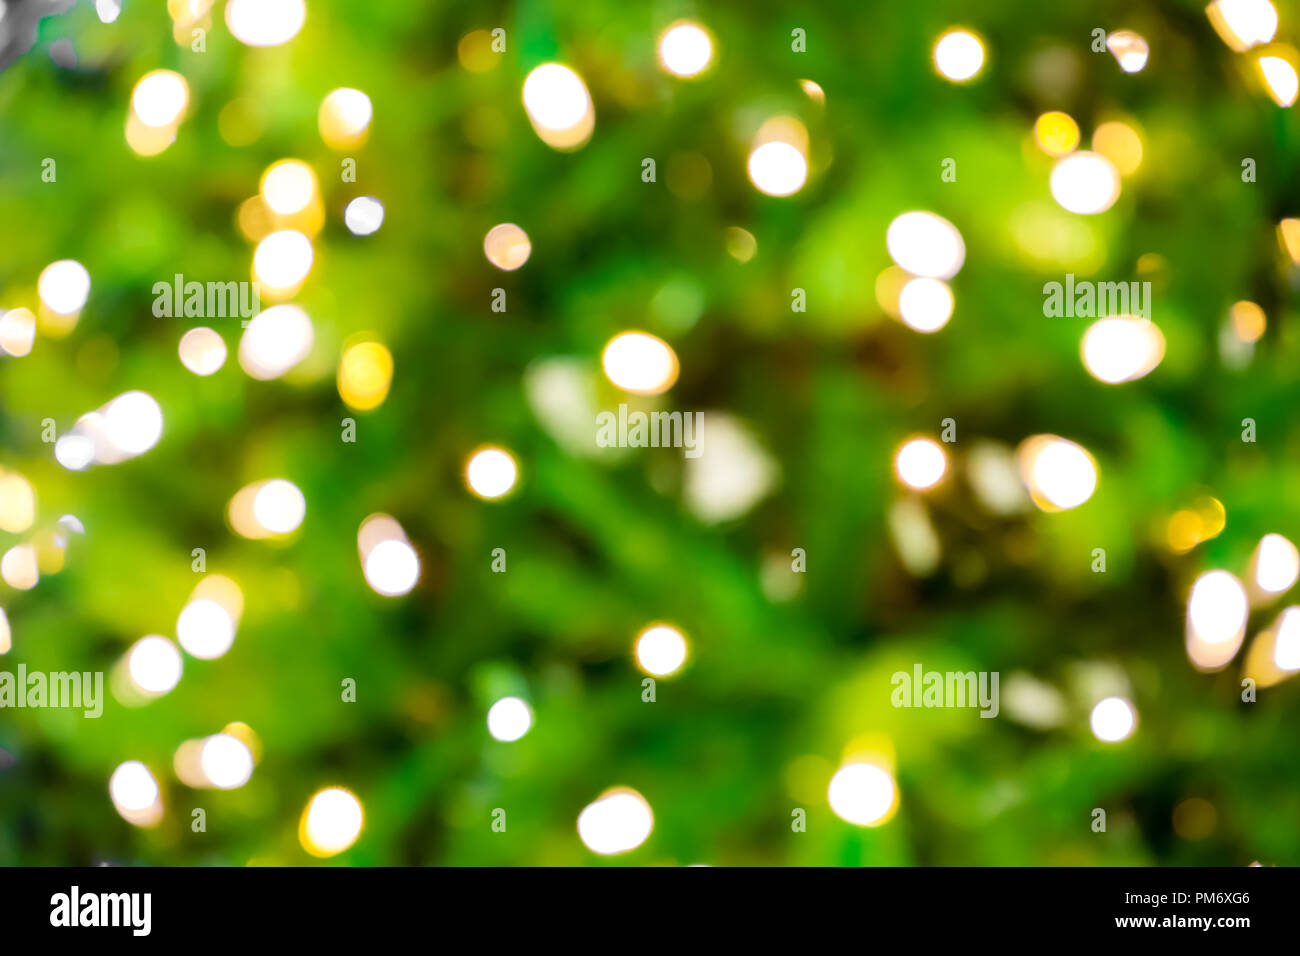 Blurred background with bokeh lights on green/closeup of blurred Christmas tree with lights Stock Photo